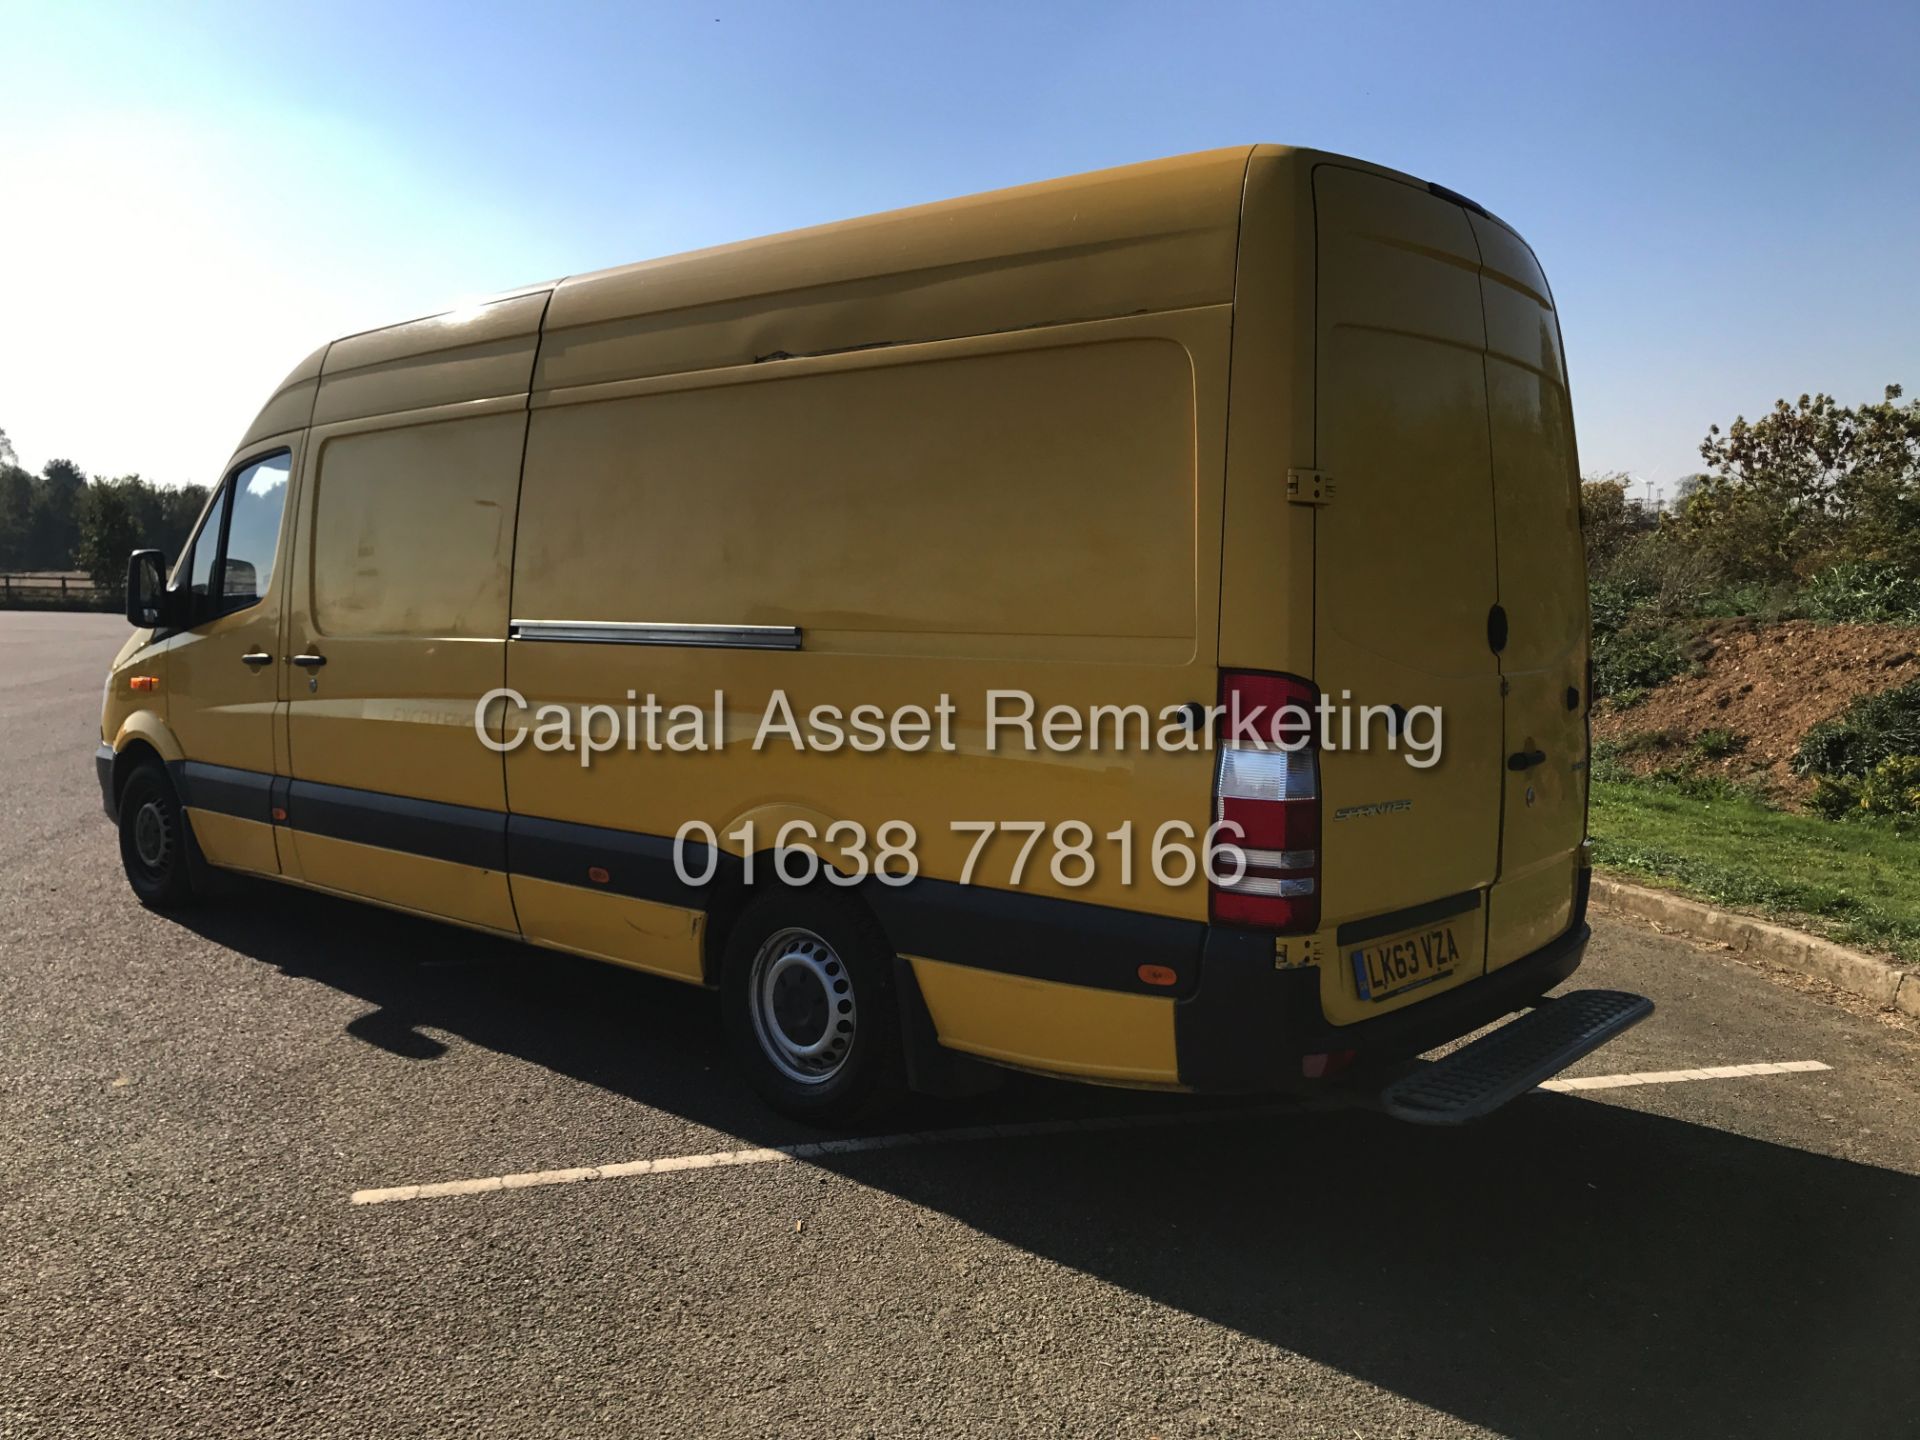 (ON SALE) MERCEDES SPRINTER 313CDI "130BHP - 6 SPEED" 1 OWNER (2014 MODEL - NEW SHAPE) AIR CON - Image 5 of 14